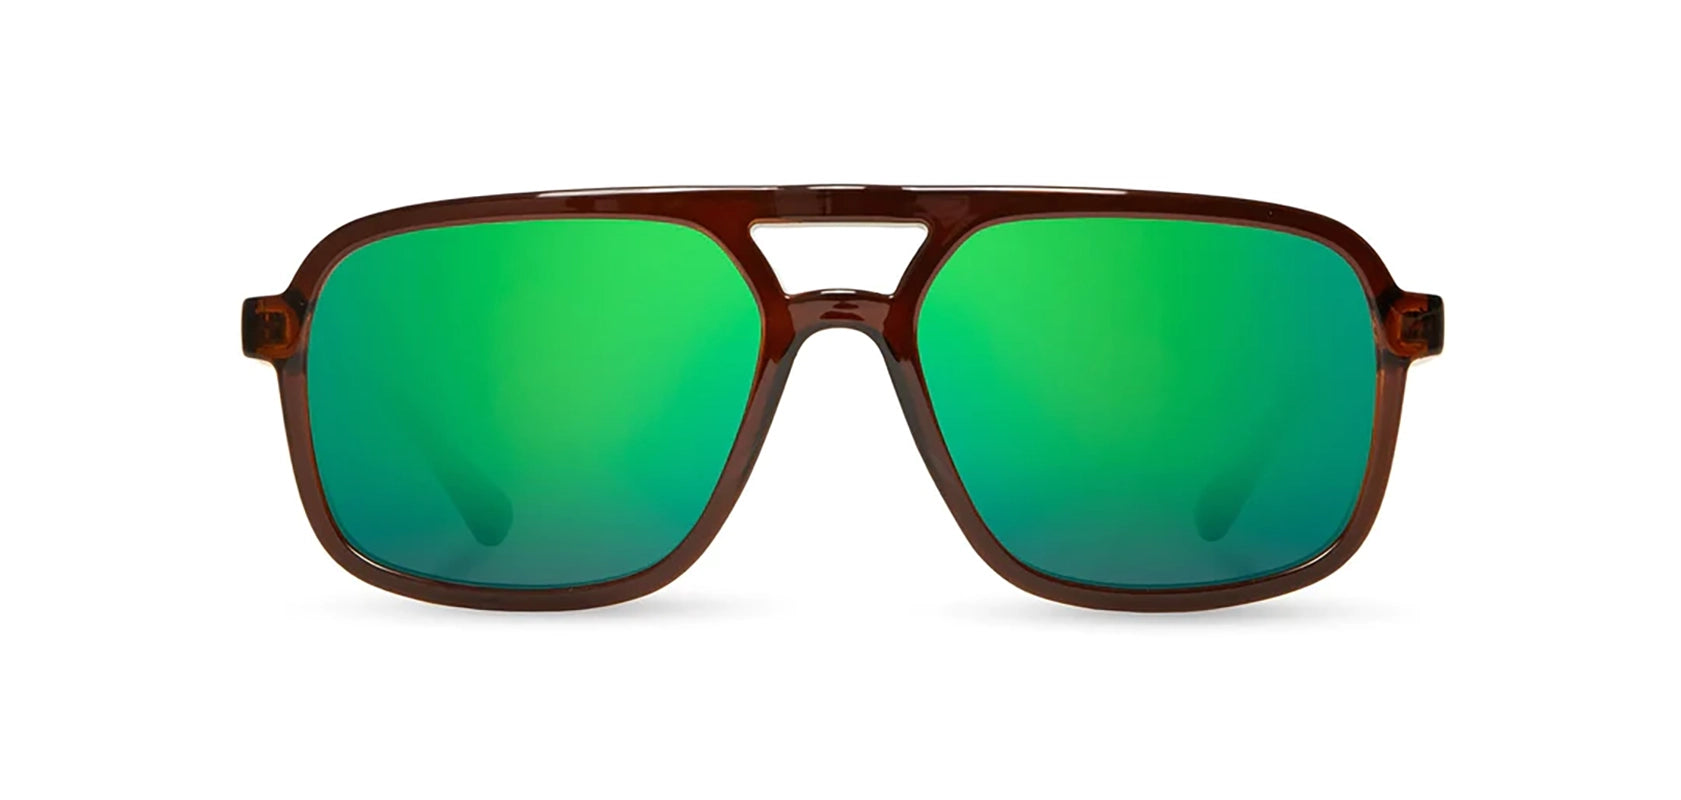 Camp Glacier Sunglasses in Clay & walnut frames, with HD+ Green Flash polarized lenses, front  view